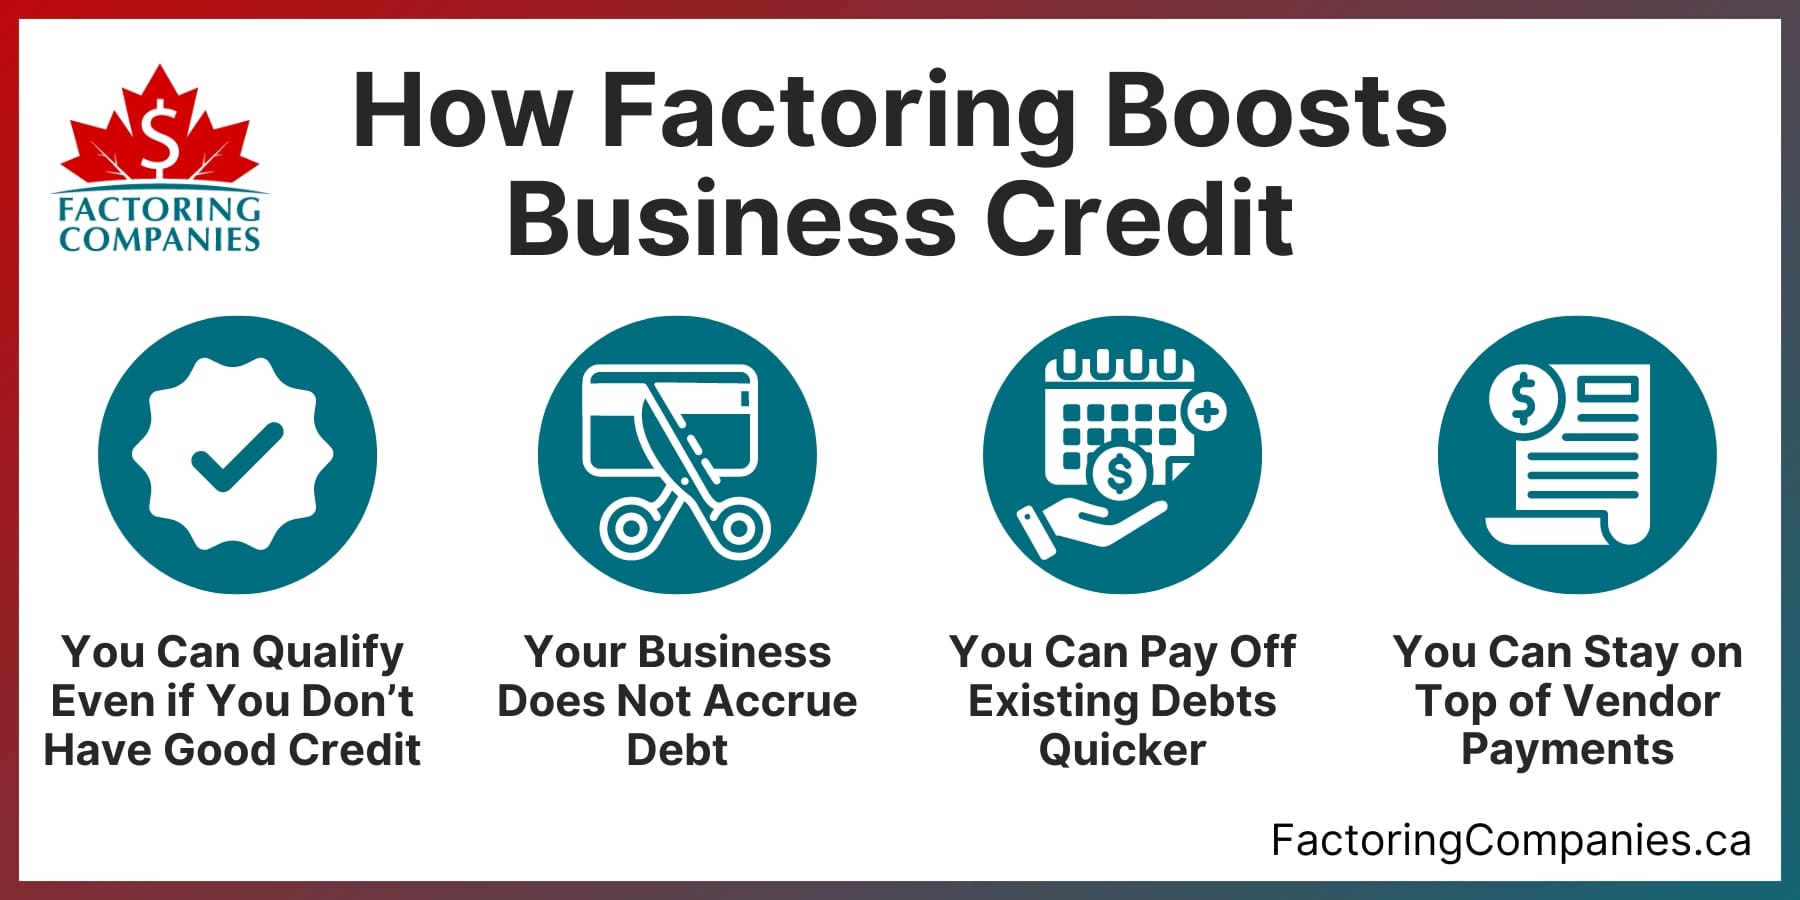 How Building Business Credit with Factoring Works